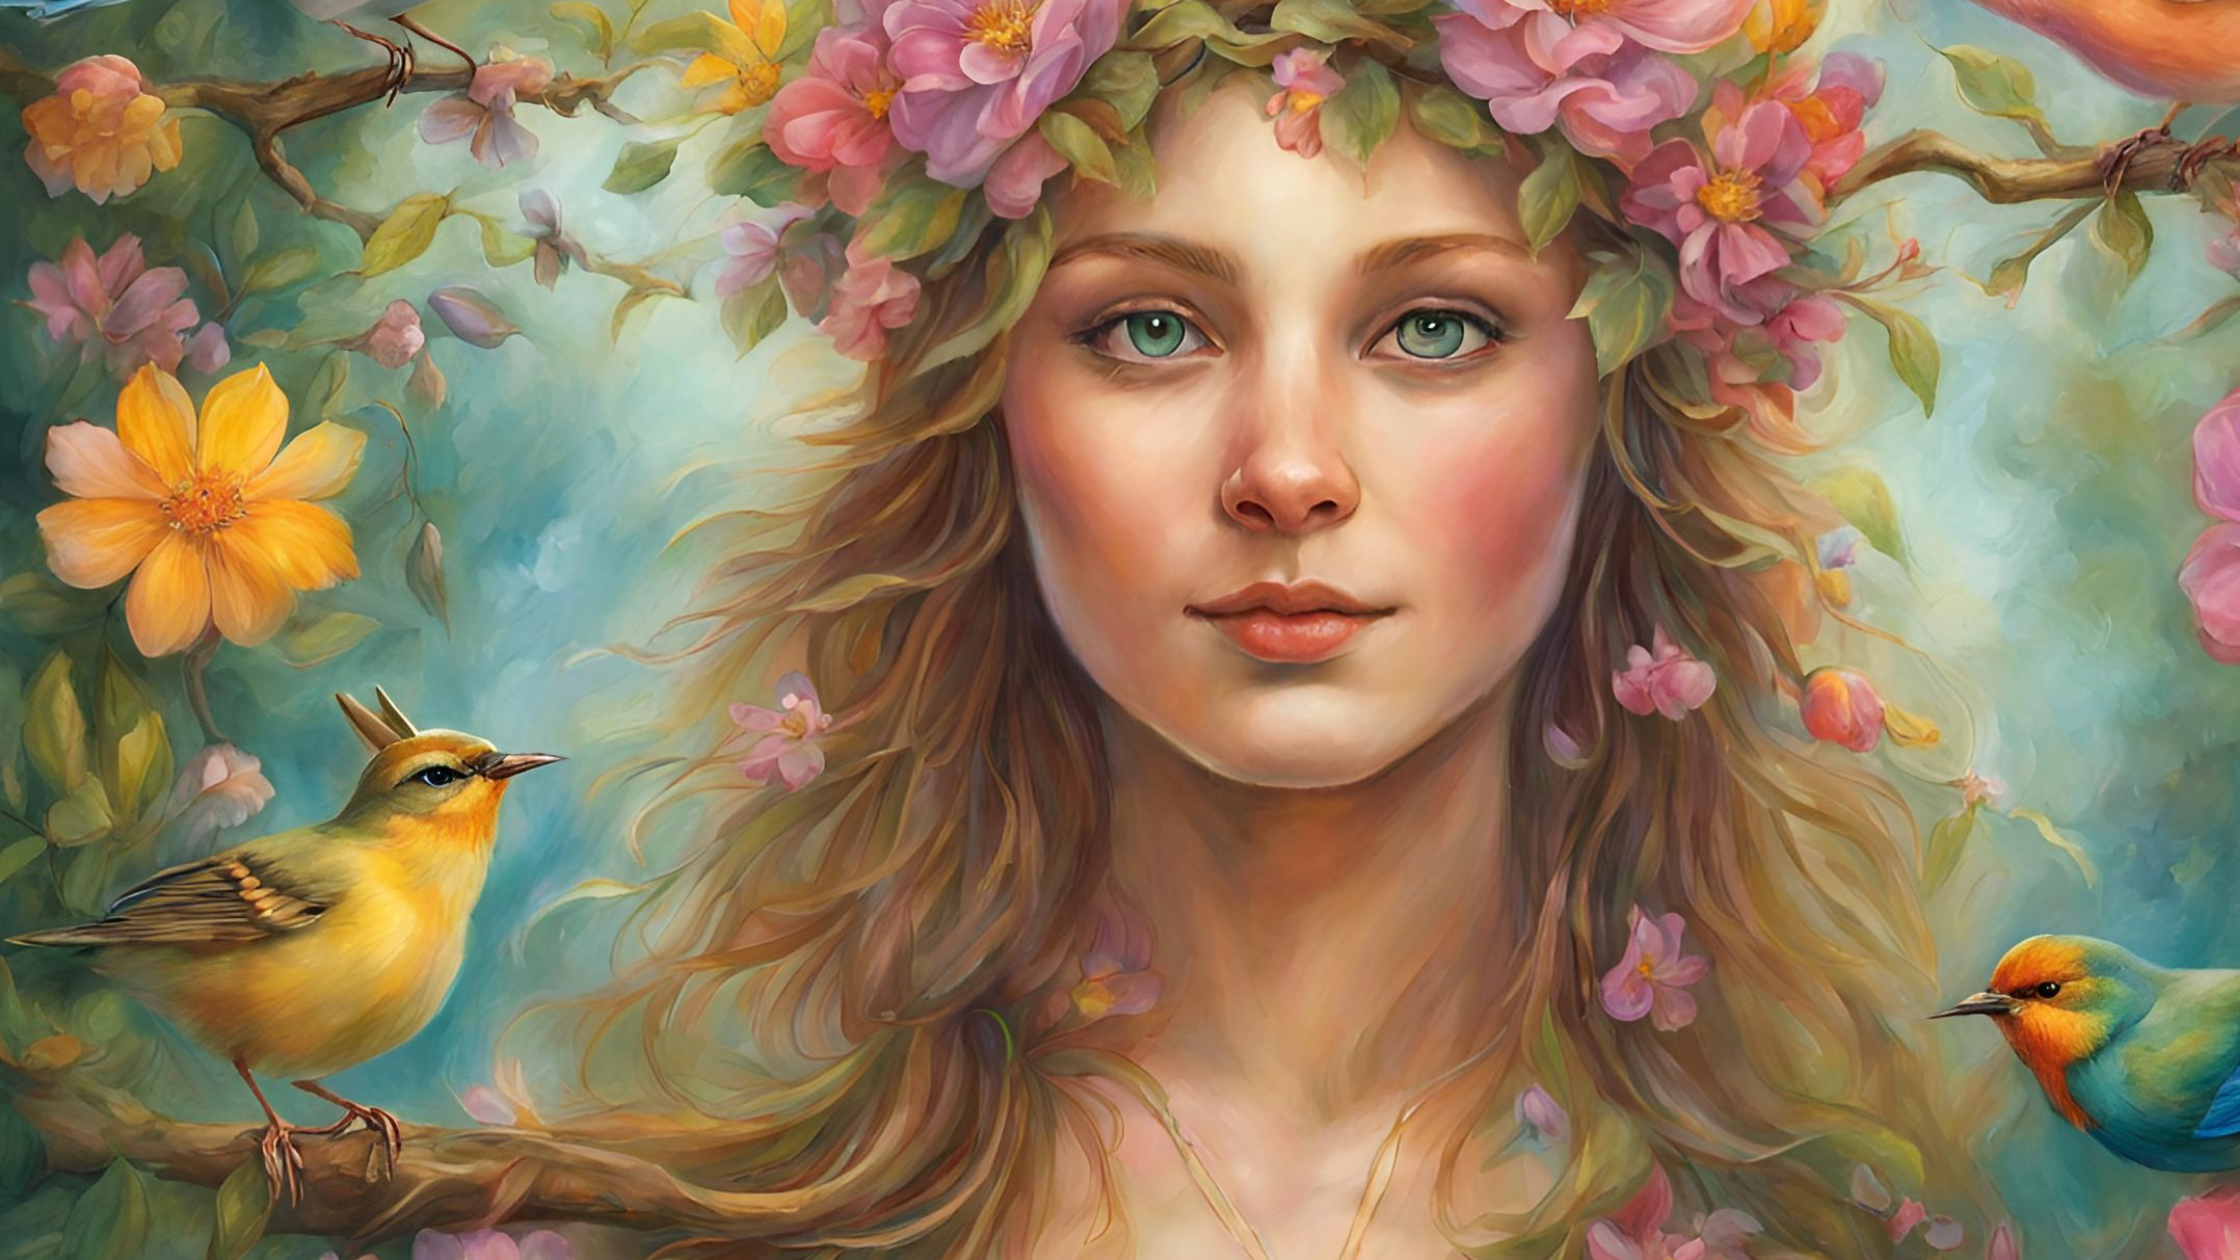 vivid and festive images capturing the essence of Ostara, the pagan festival celebrating spring equinox. Envision scenes of nature awakening, with vibrant colors of blossoming flowers, budding trees, chirping birds and woman Jahreskreisfest Ostara